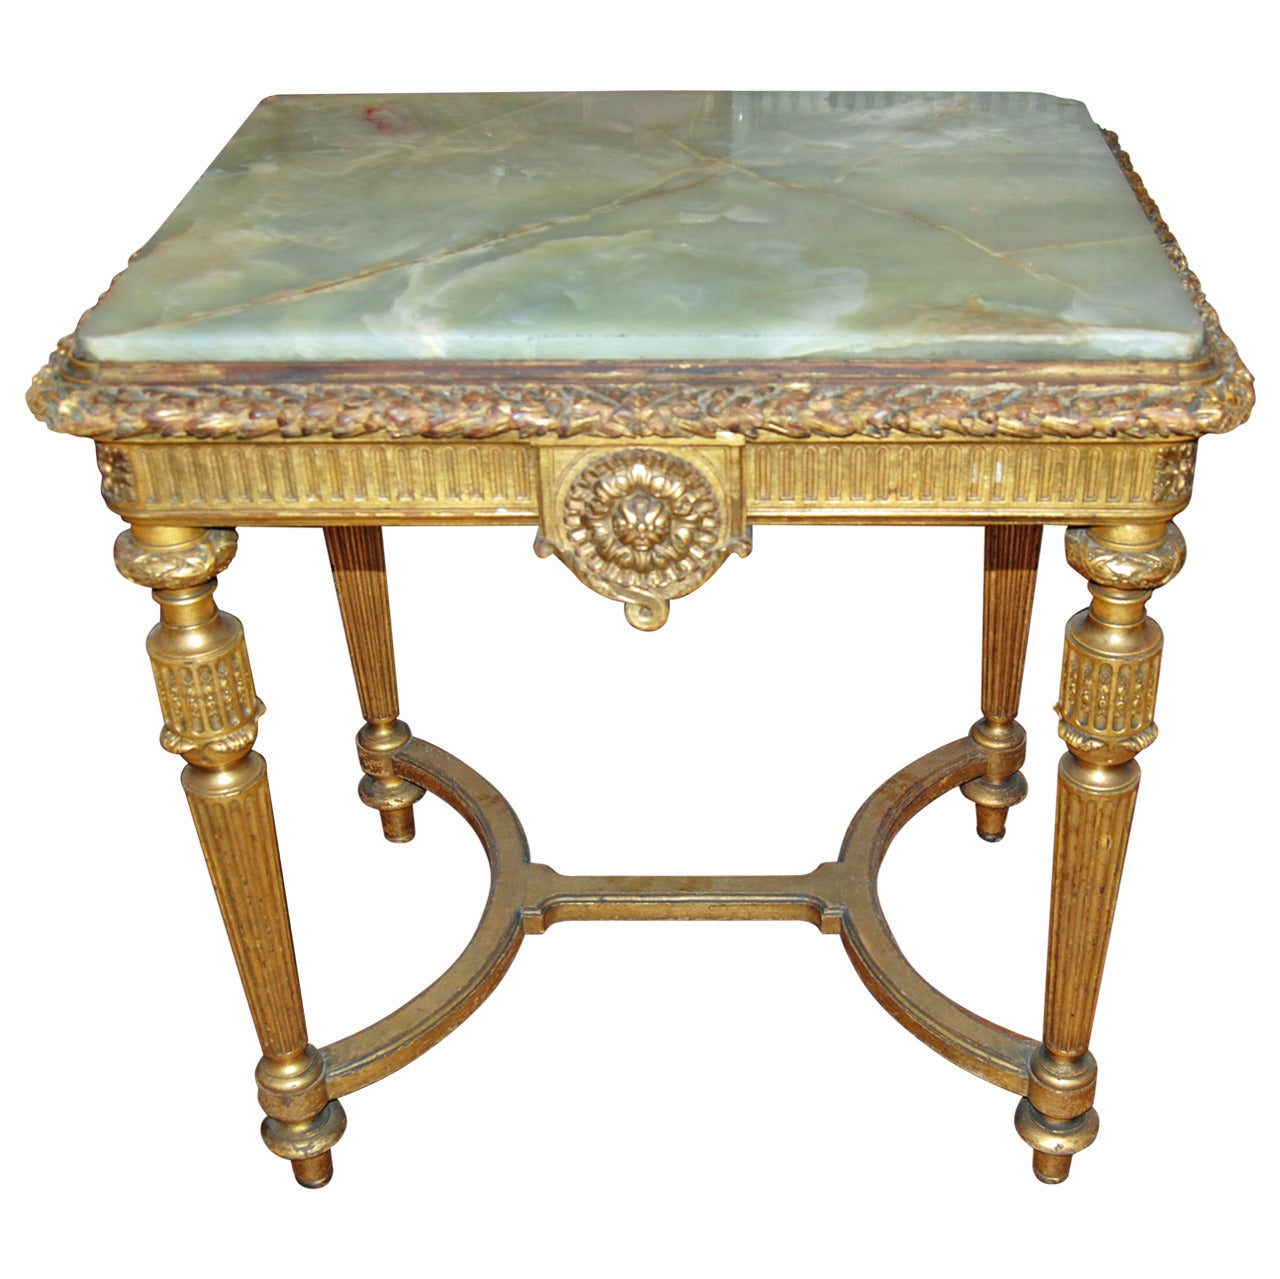 19th Century Giltwood and Onyx Center Table